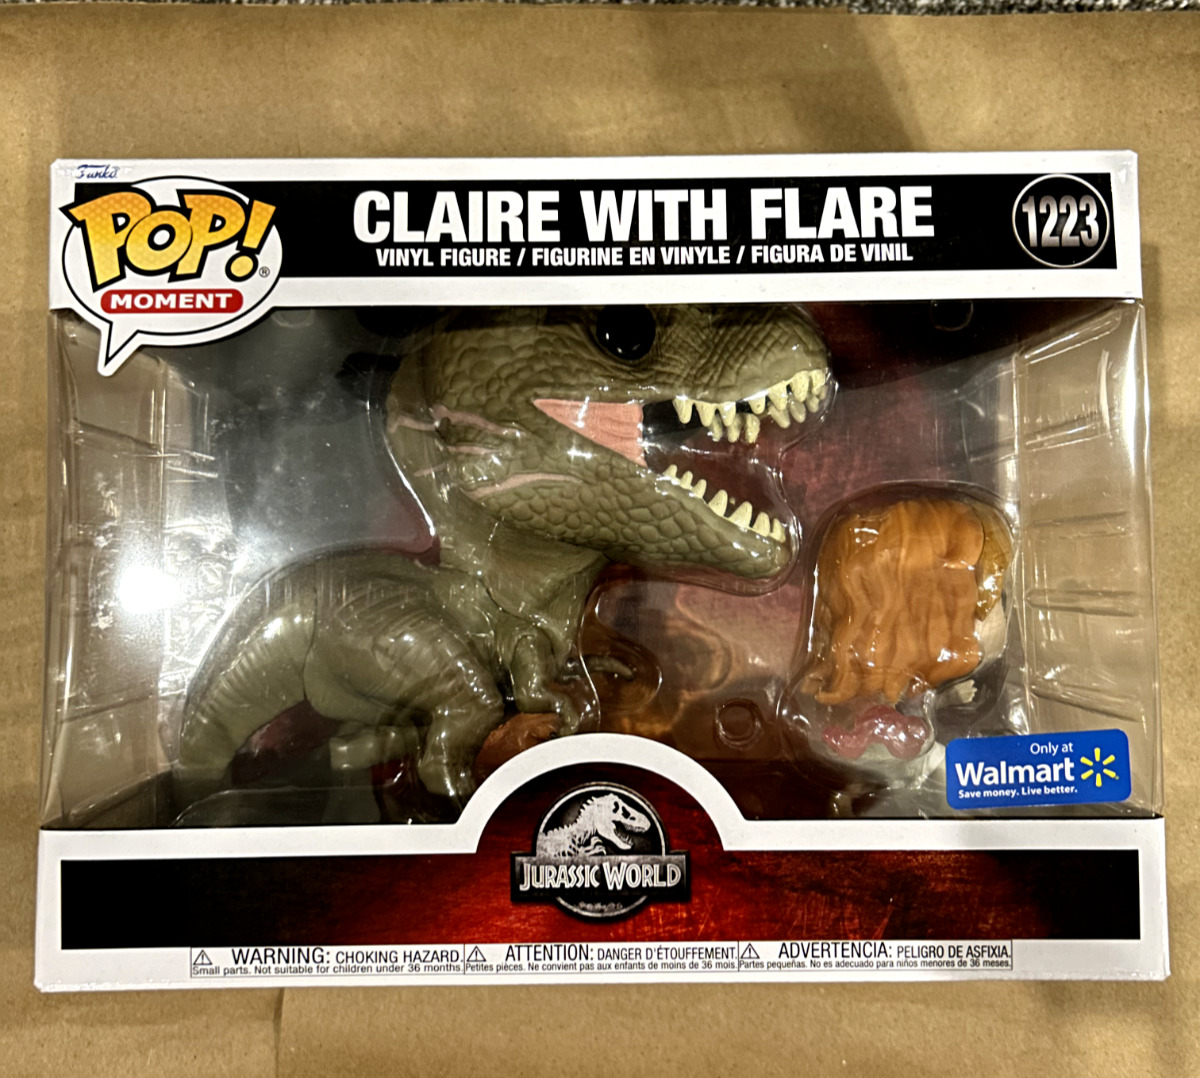 Funko Pop Moments: Claire With Flare - Walmart (Exclusive) #1223